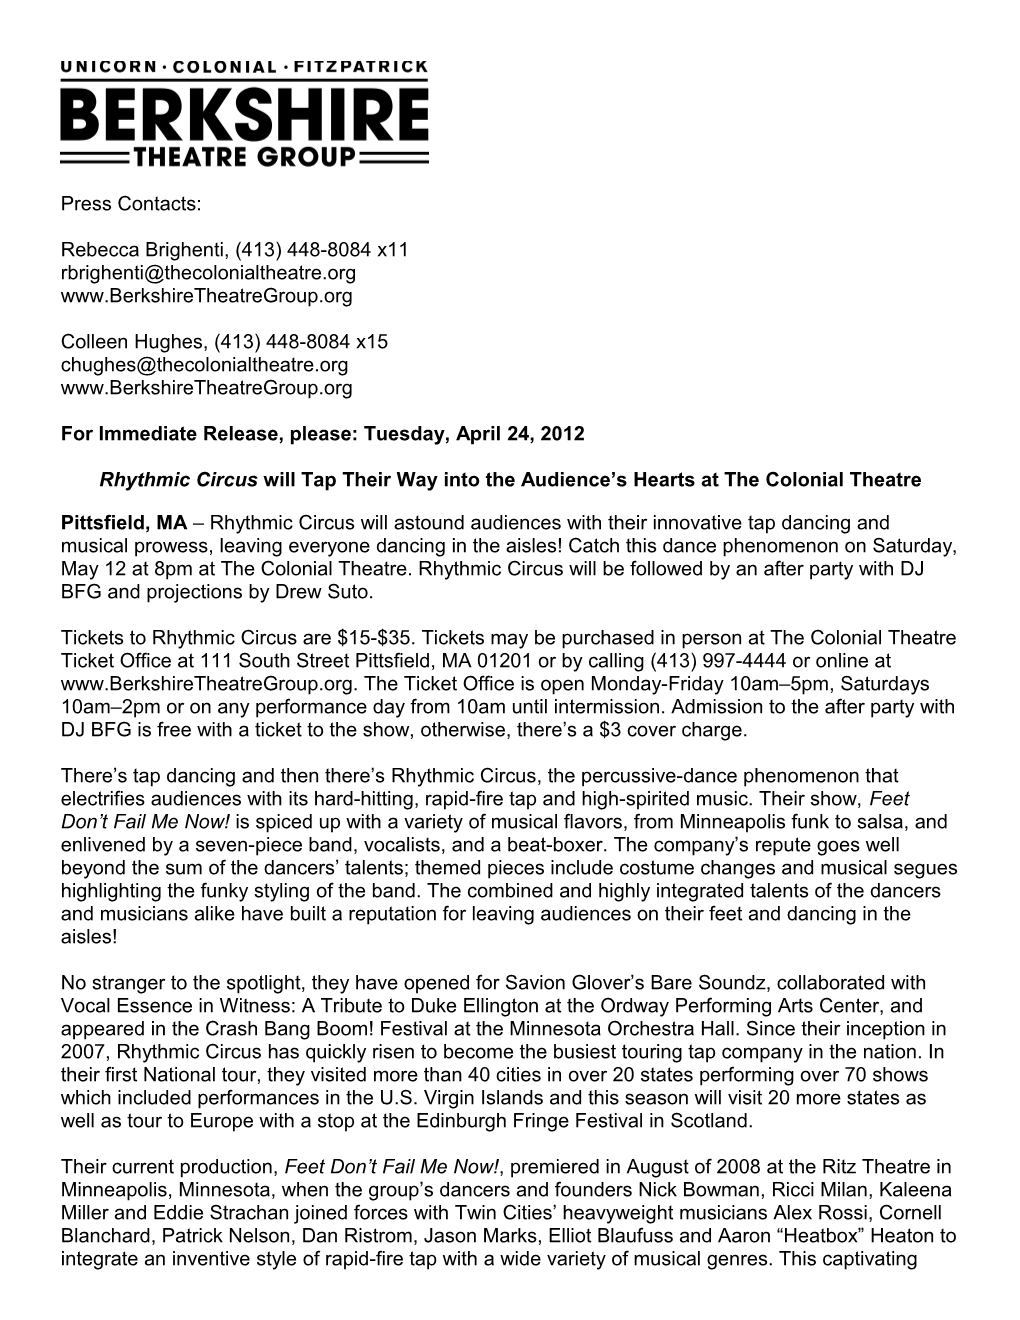 For Immediate Release, Please: Tuesday, April 24, 2012